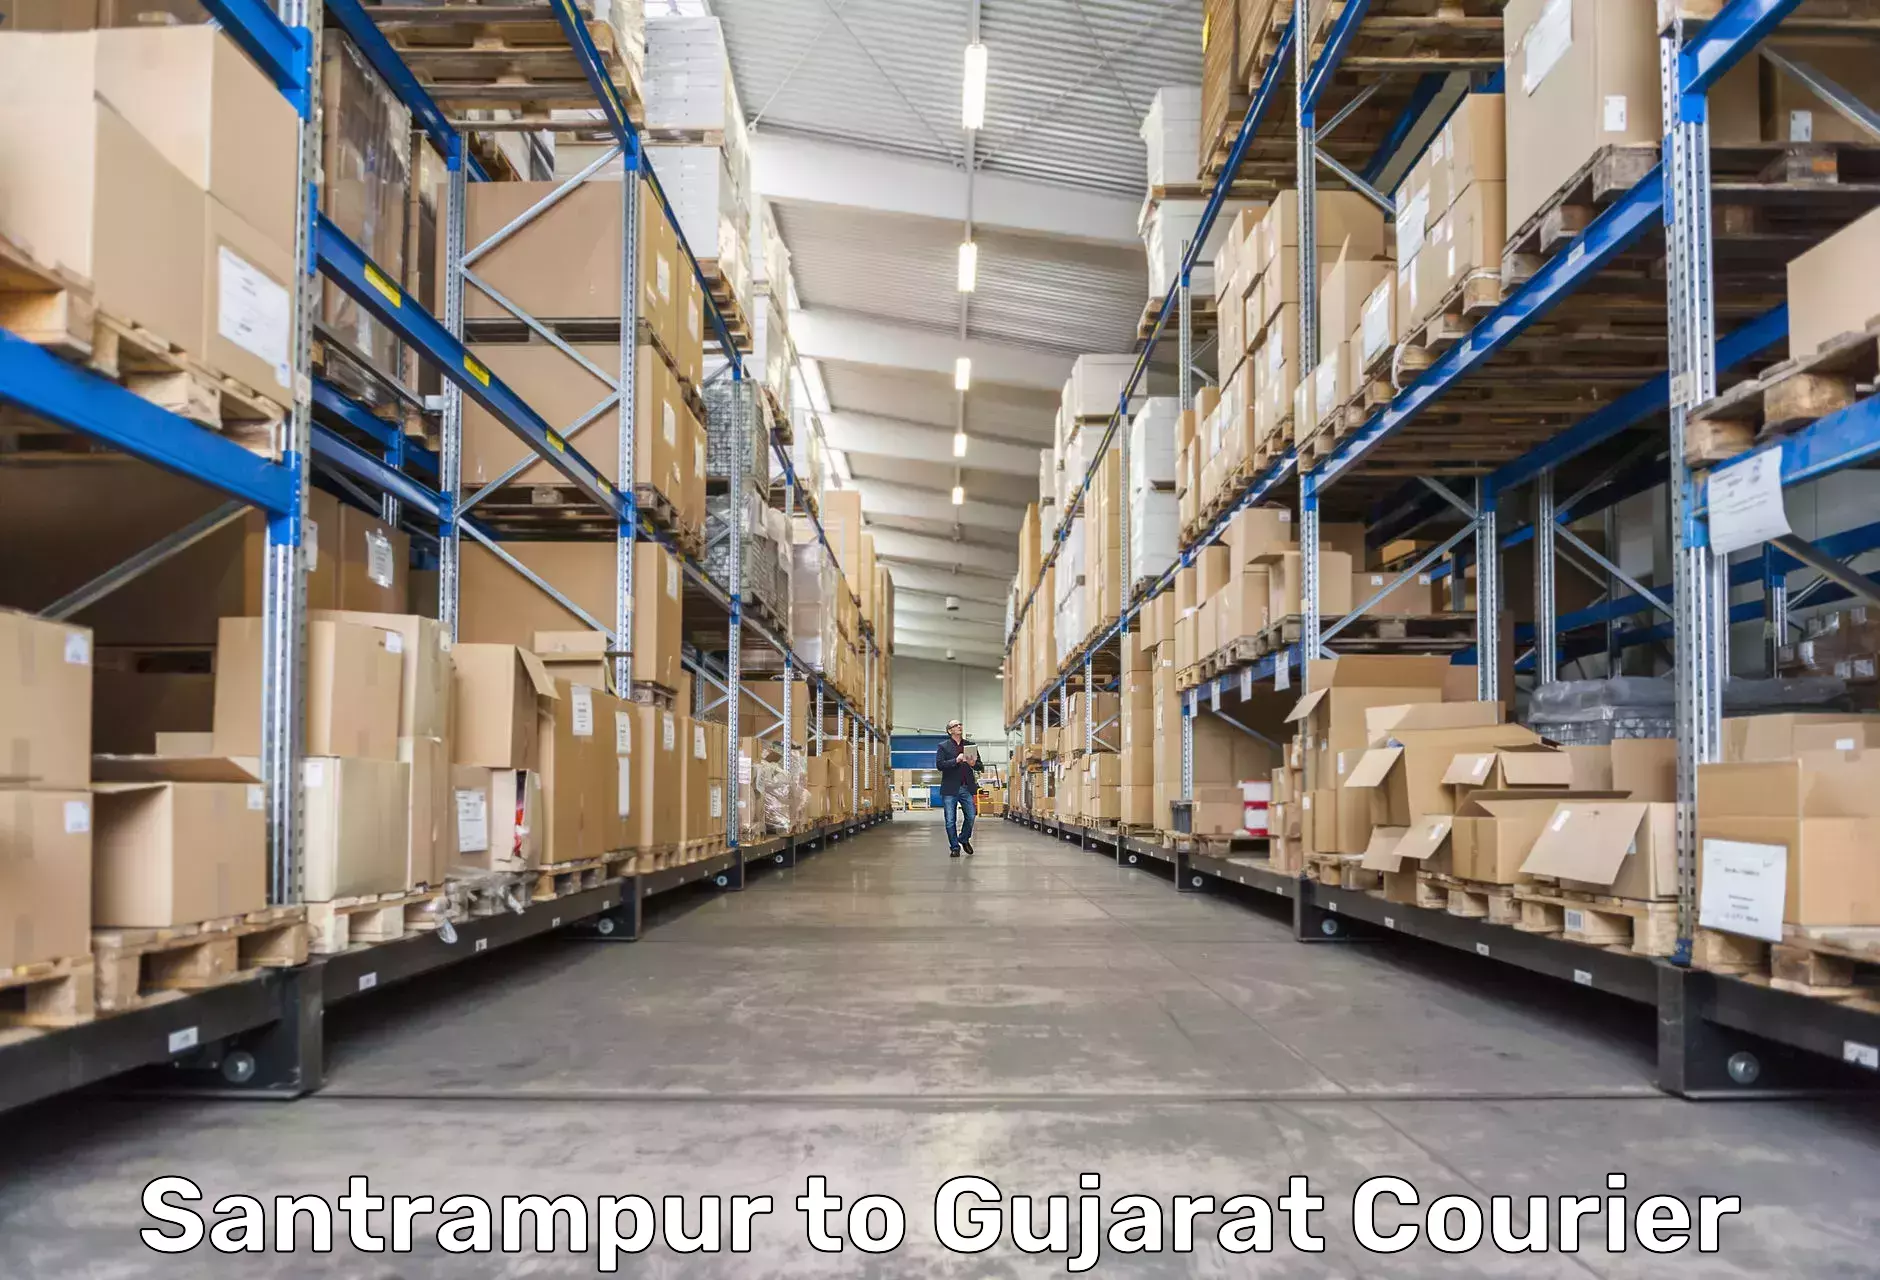 Multi-national courier services Santrampur to Gujarat